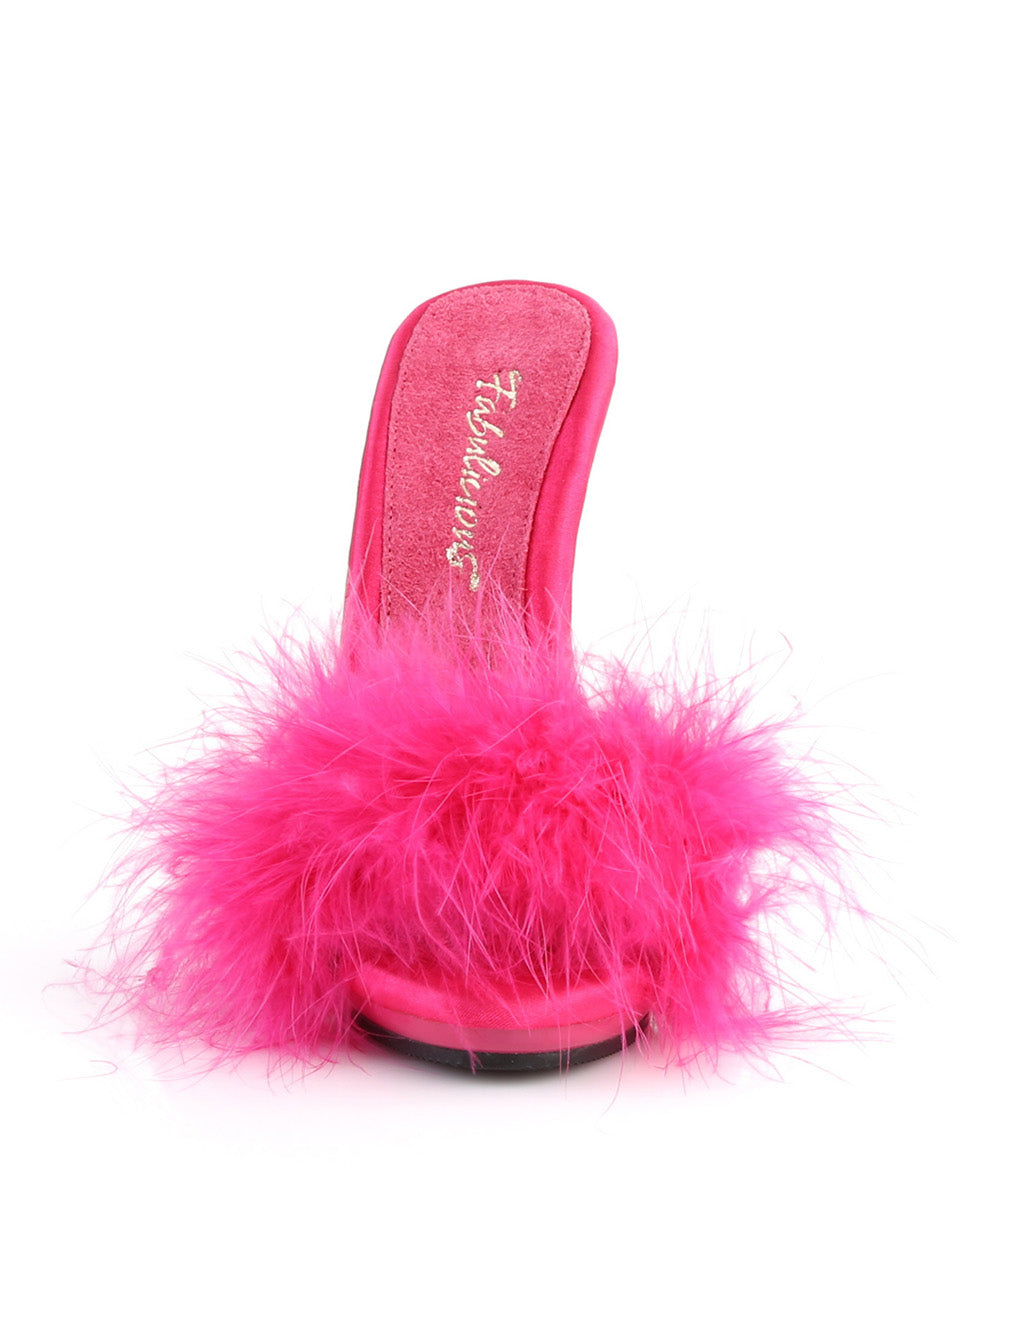 Fabulicious Marabou Poise 501F- Hot Pink- Top